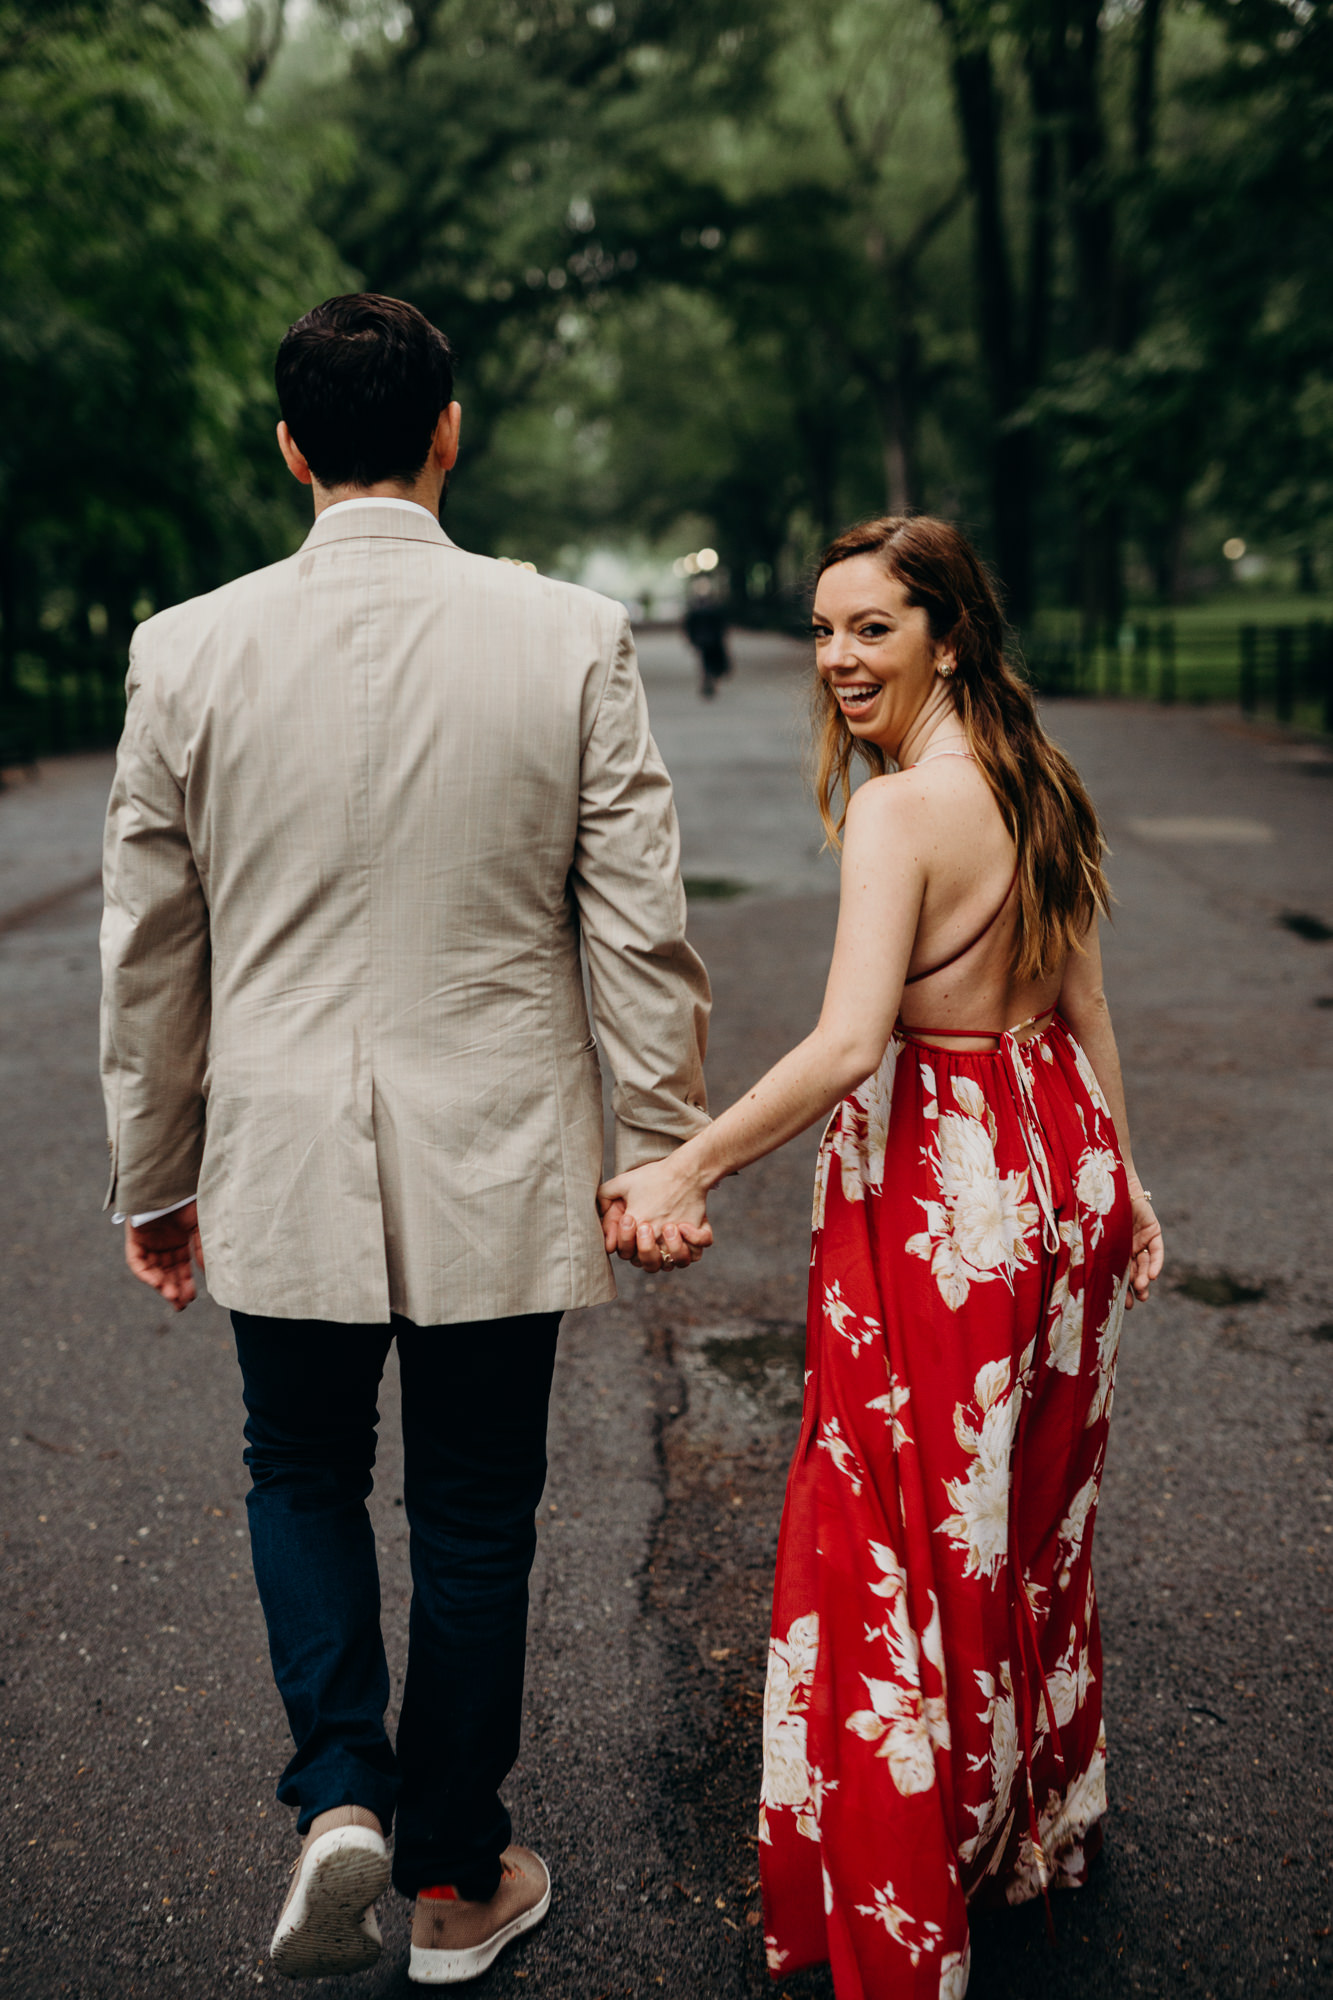 a portrait of a couple in central park, new york city